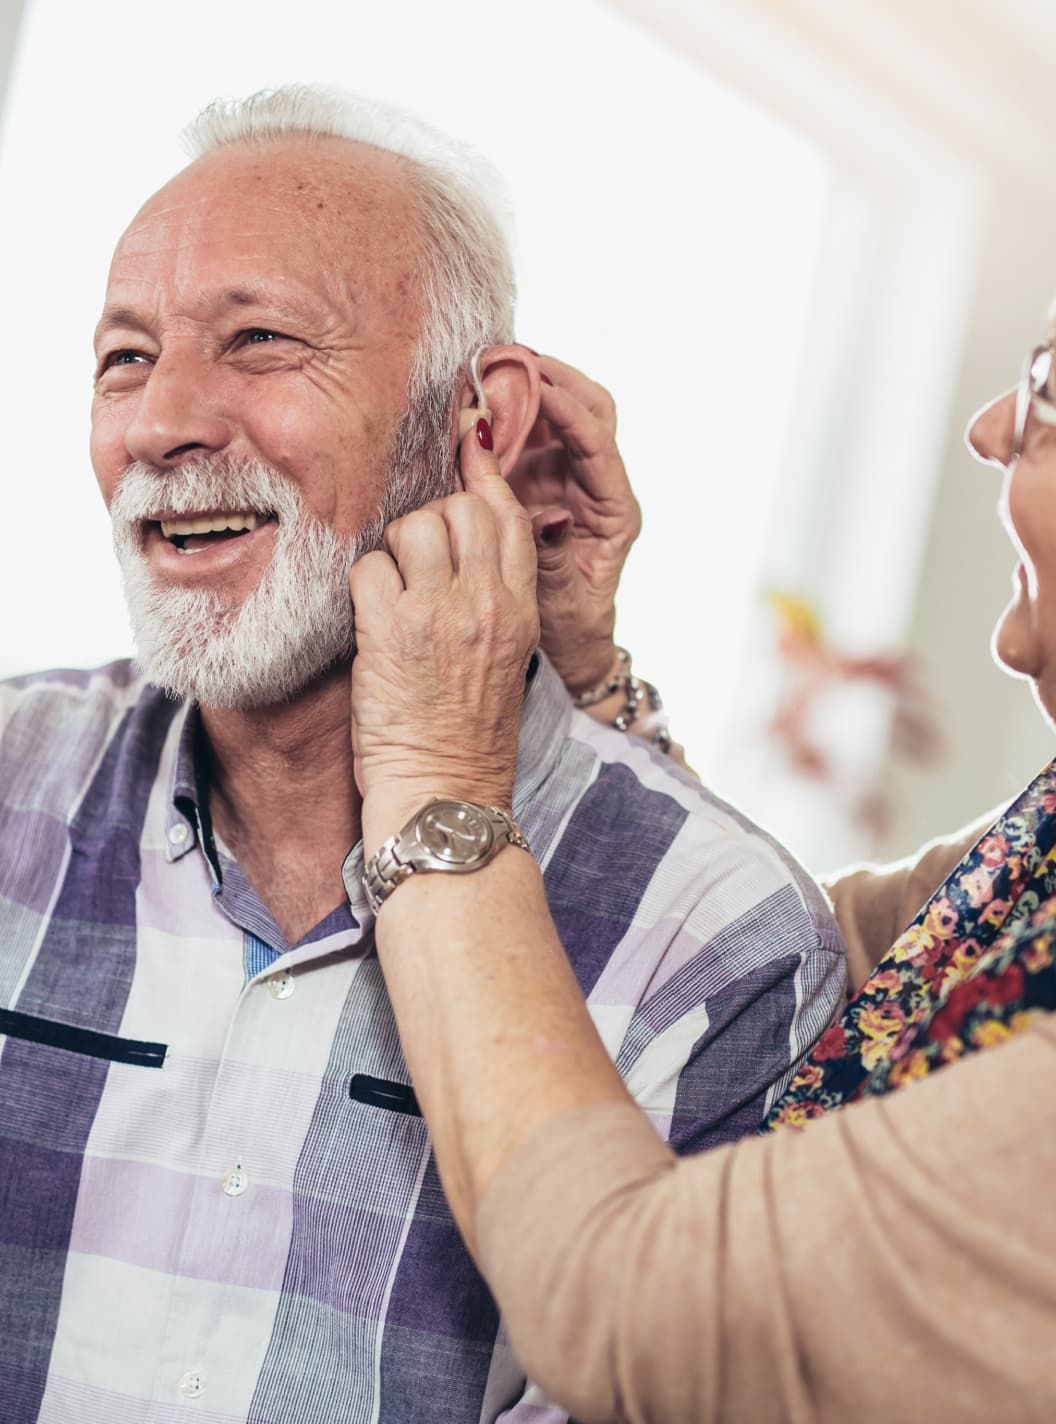 fitting a hearing aid on a person